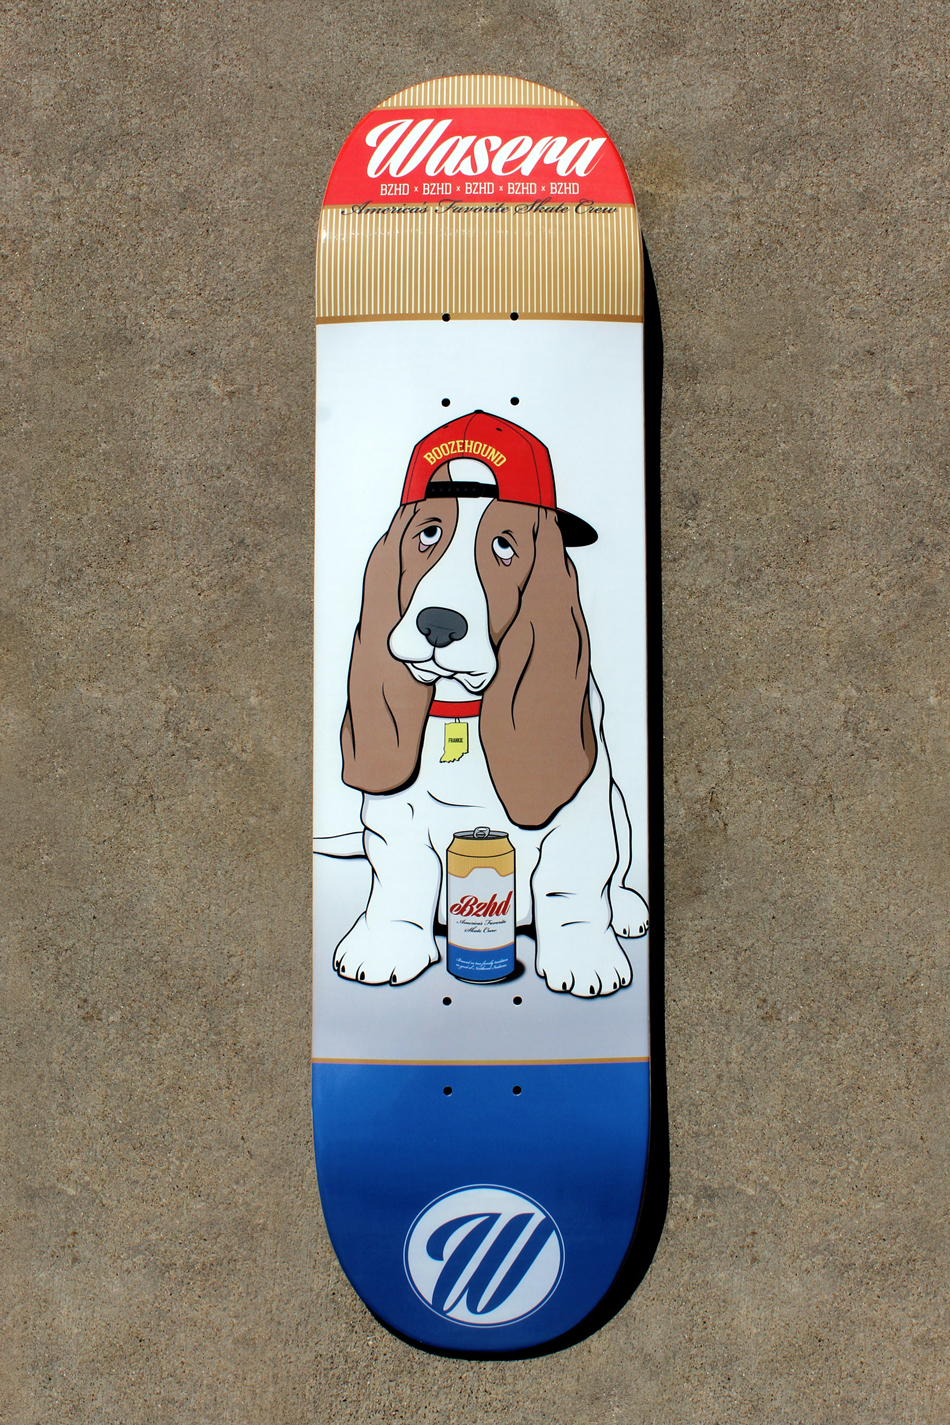 Boozehound illustration design of a dog with a Hams beer